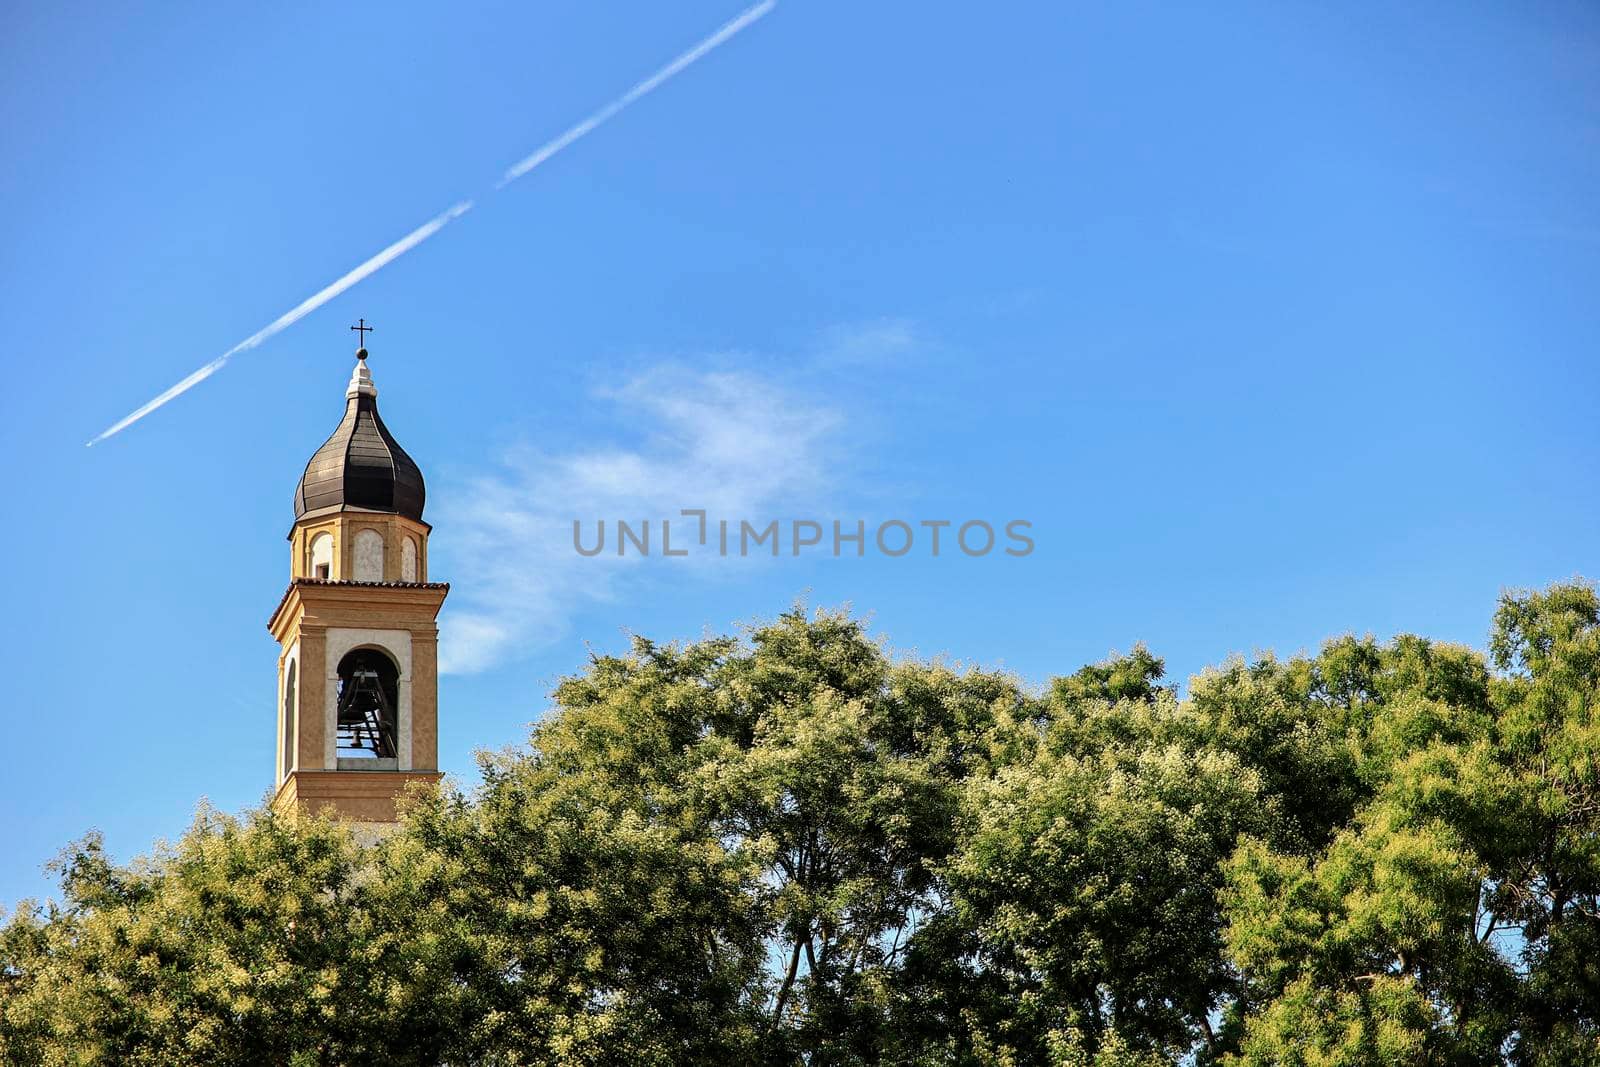 Church bell tower in the trees in Rovigo, Italy